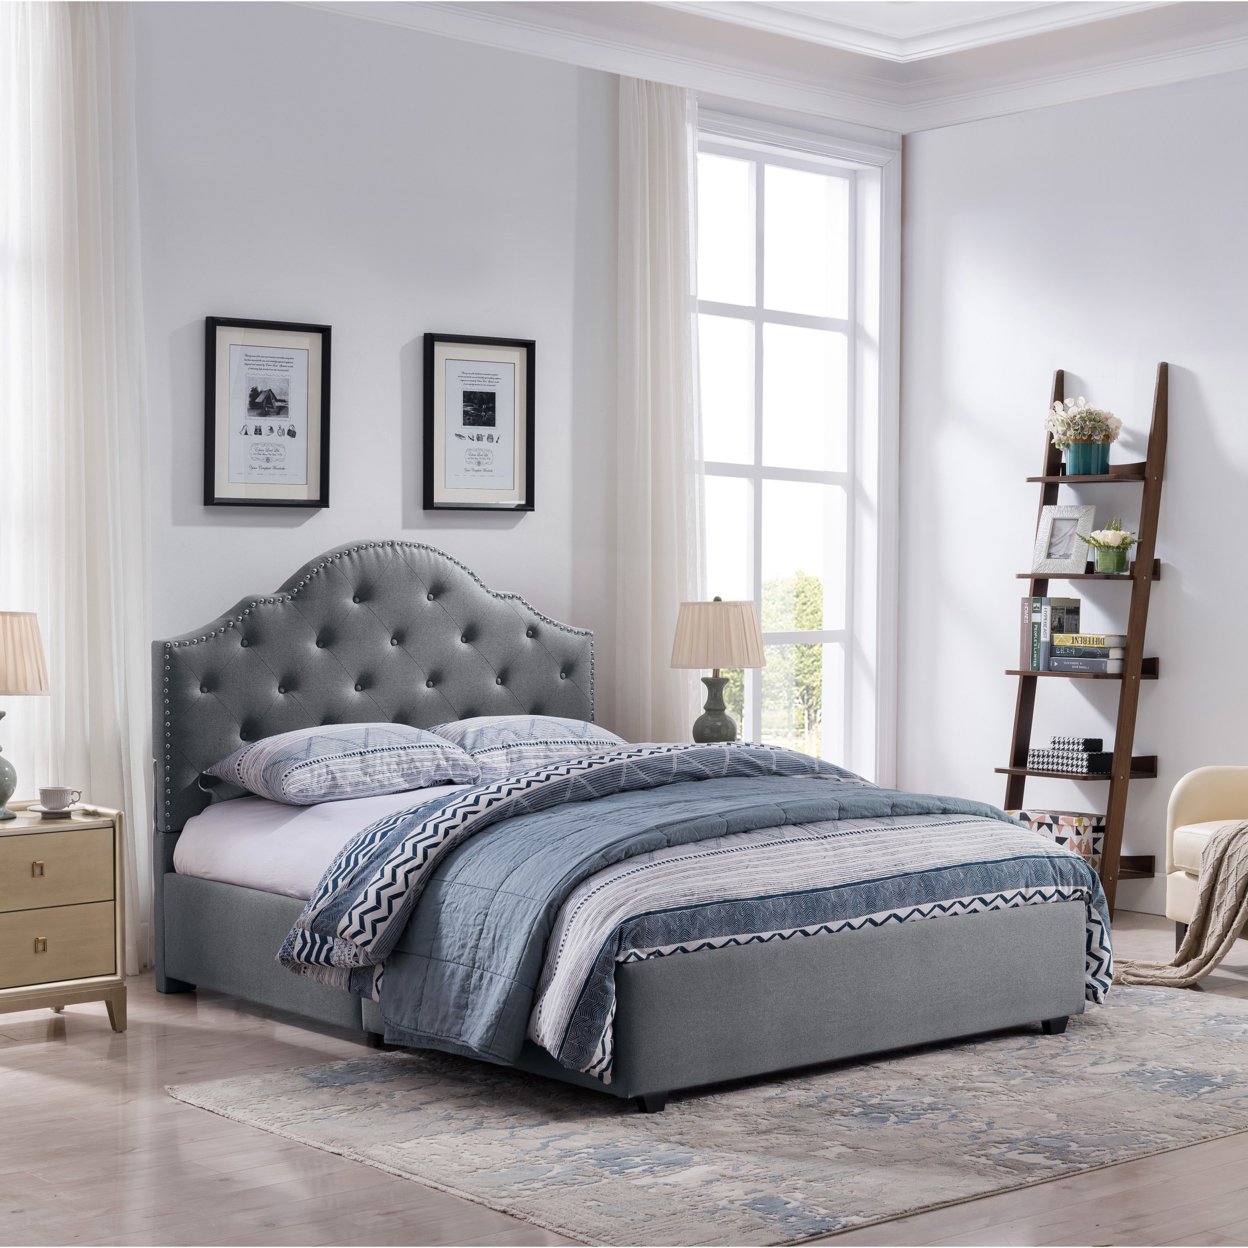 Gentry Contemporary Button-Tufted Upholstered Queen Bed Frame With Nailhead Accents - Light Gray